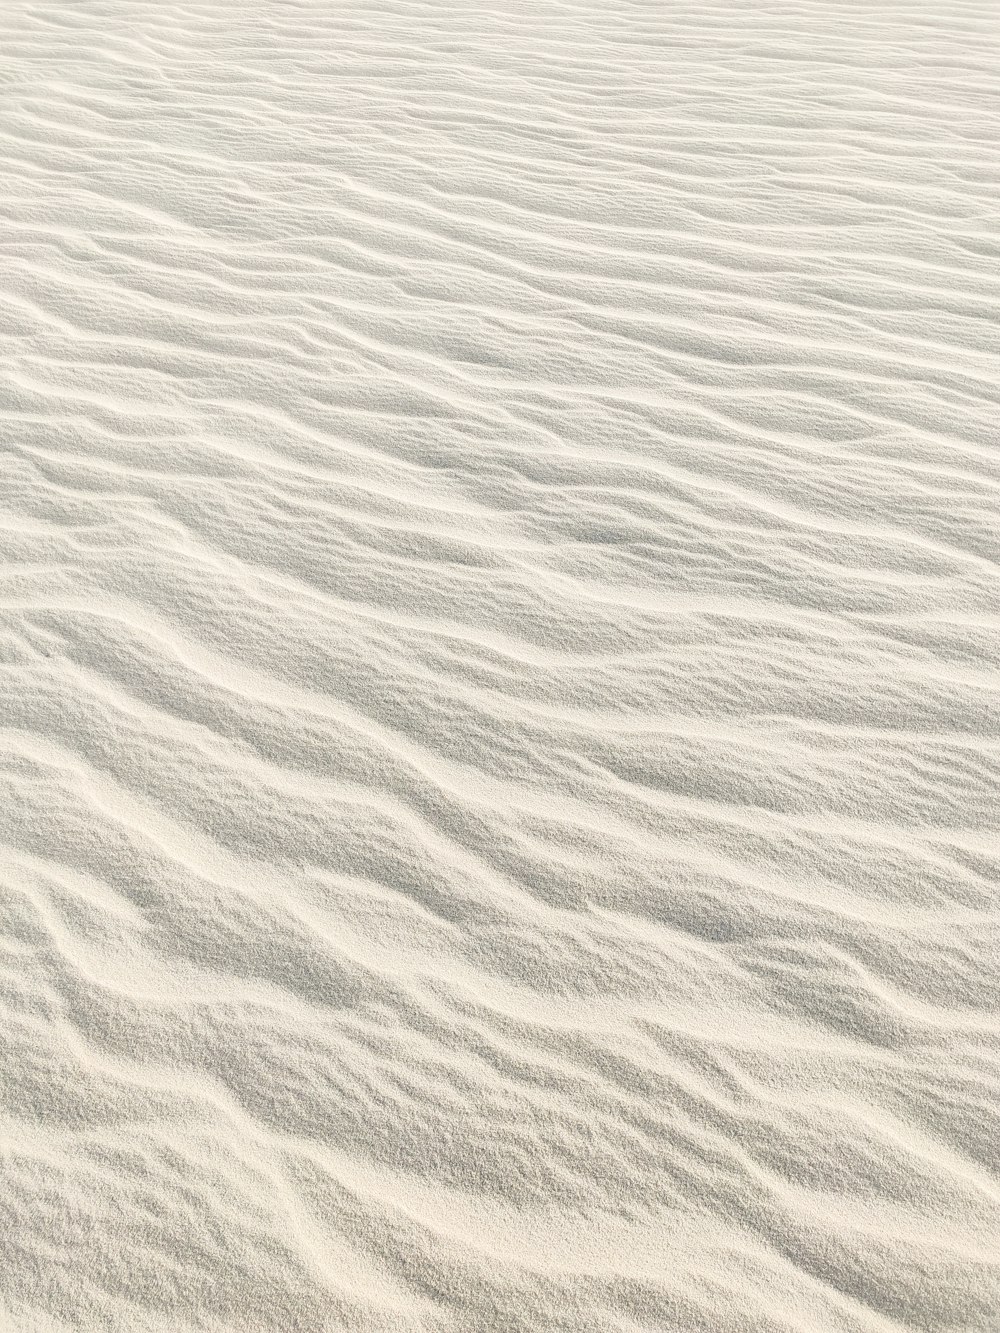 white sand with water during daytime